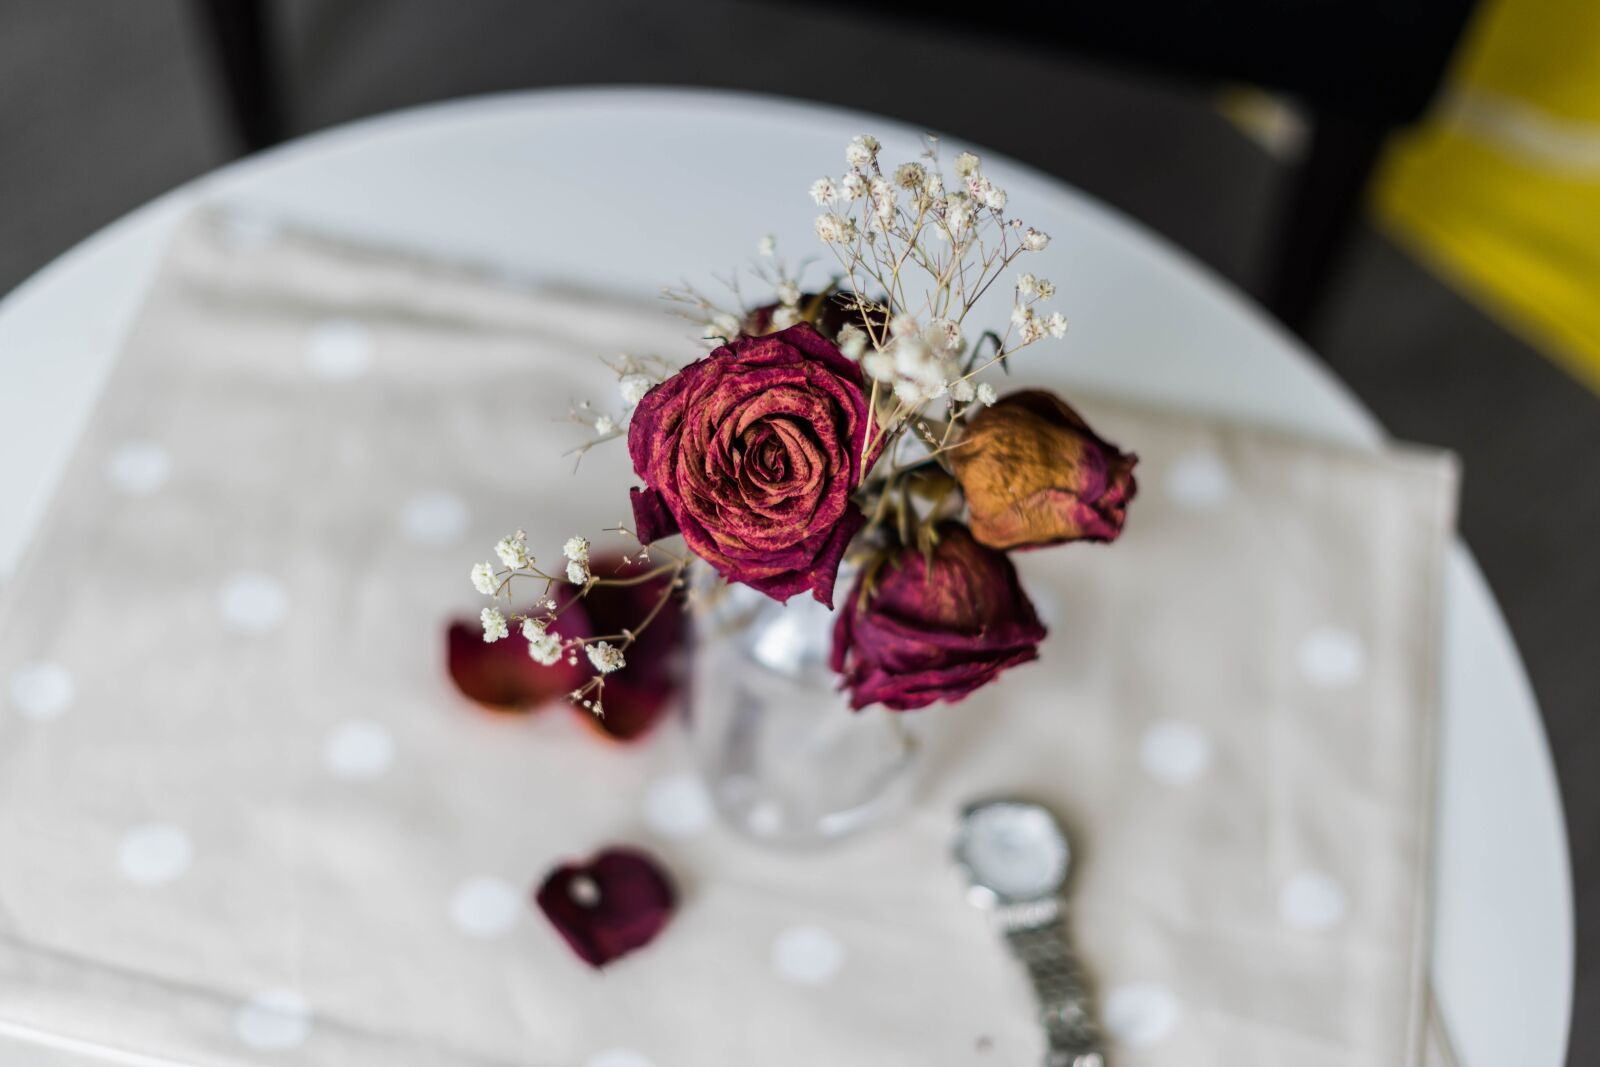 Sony a7 III sample photo. Flowers, decoration, rose photography